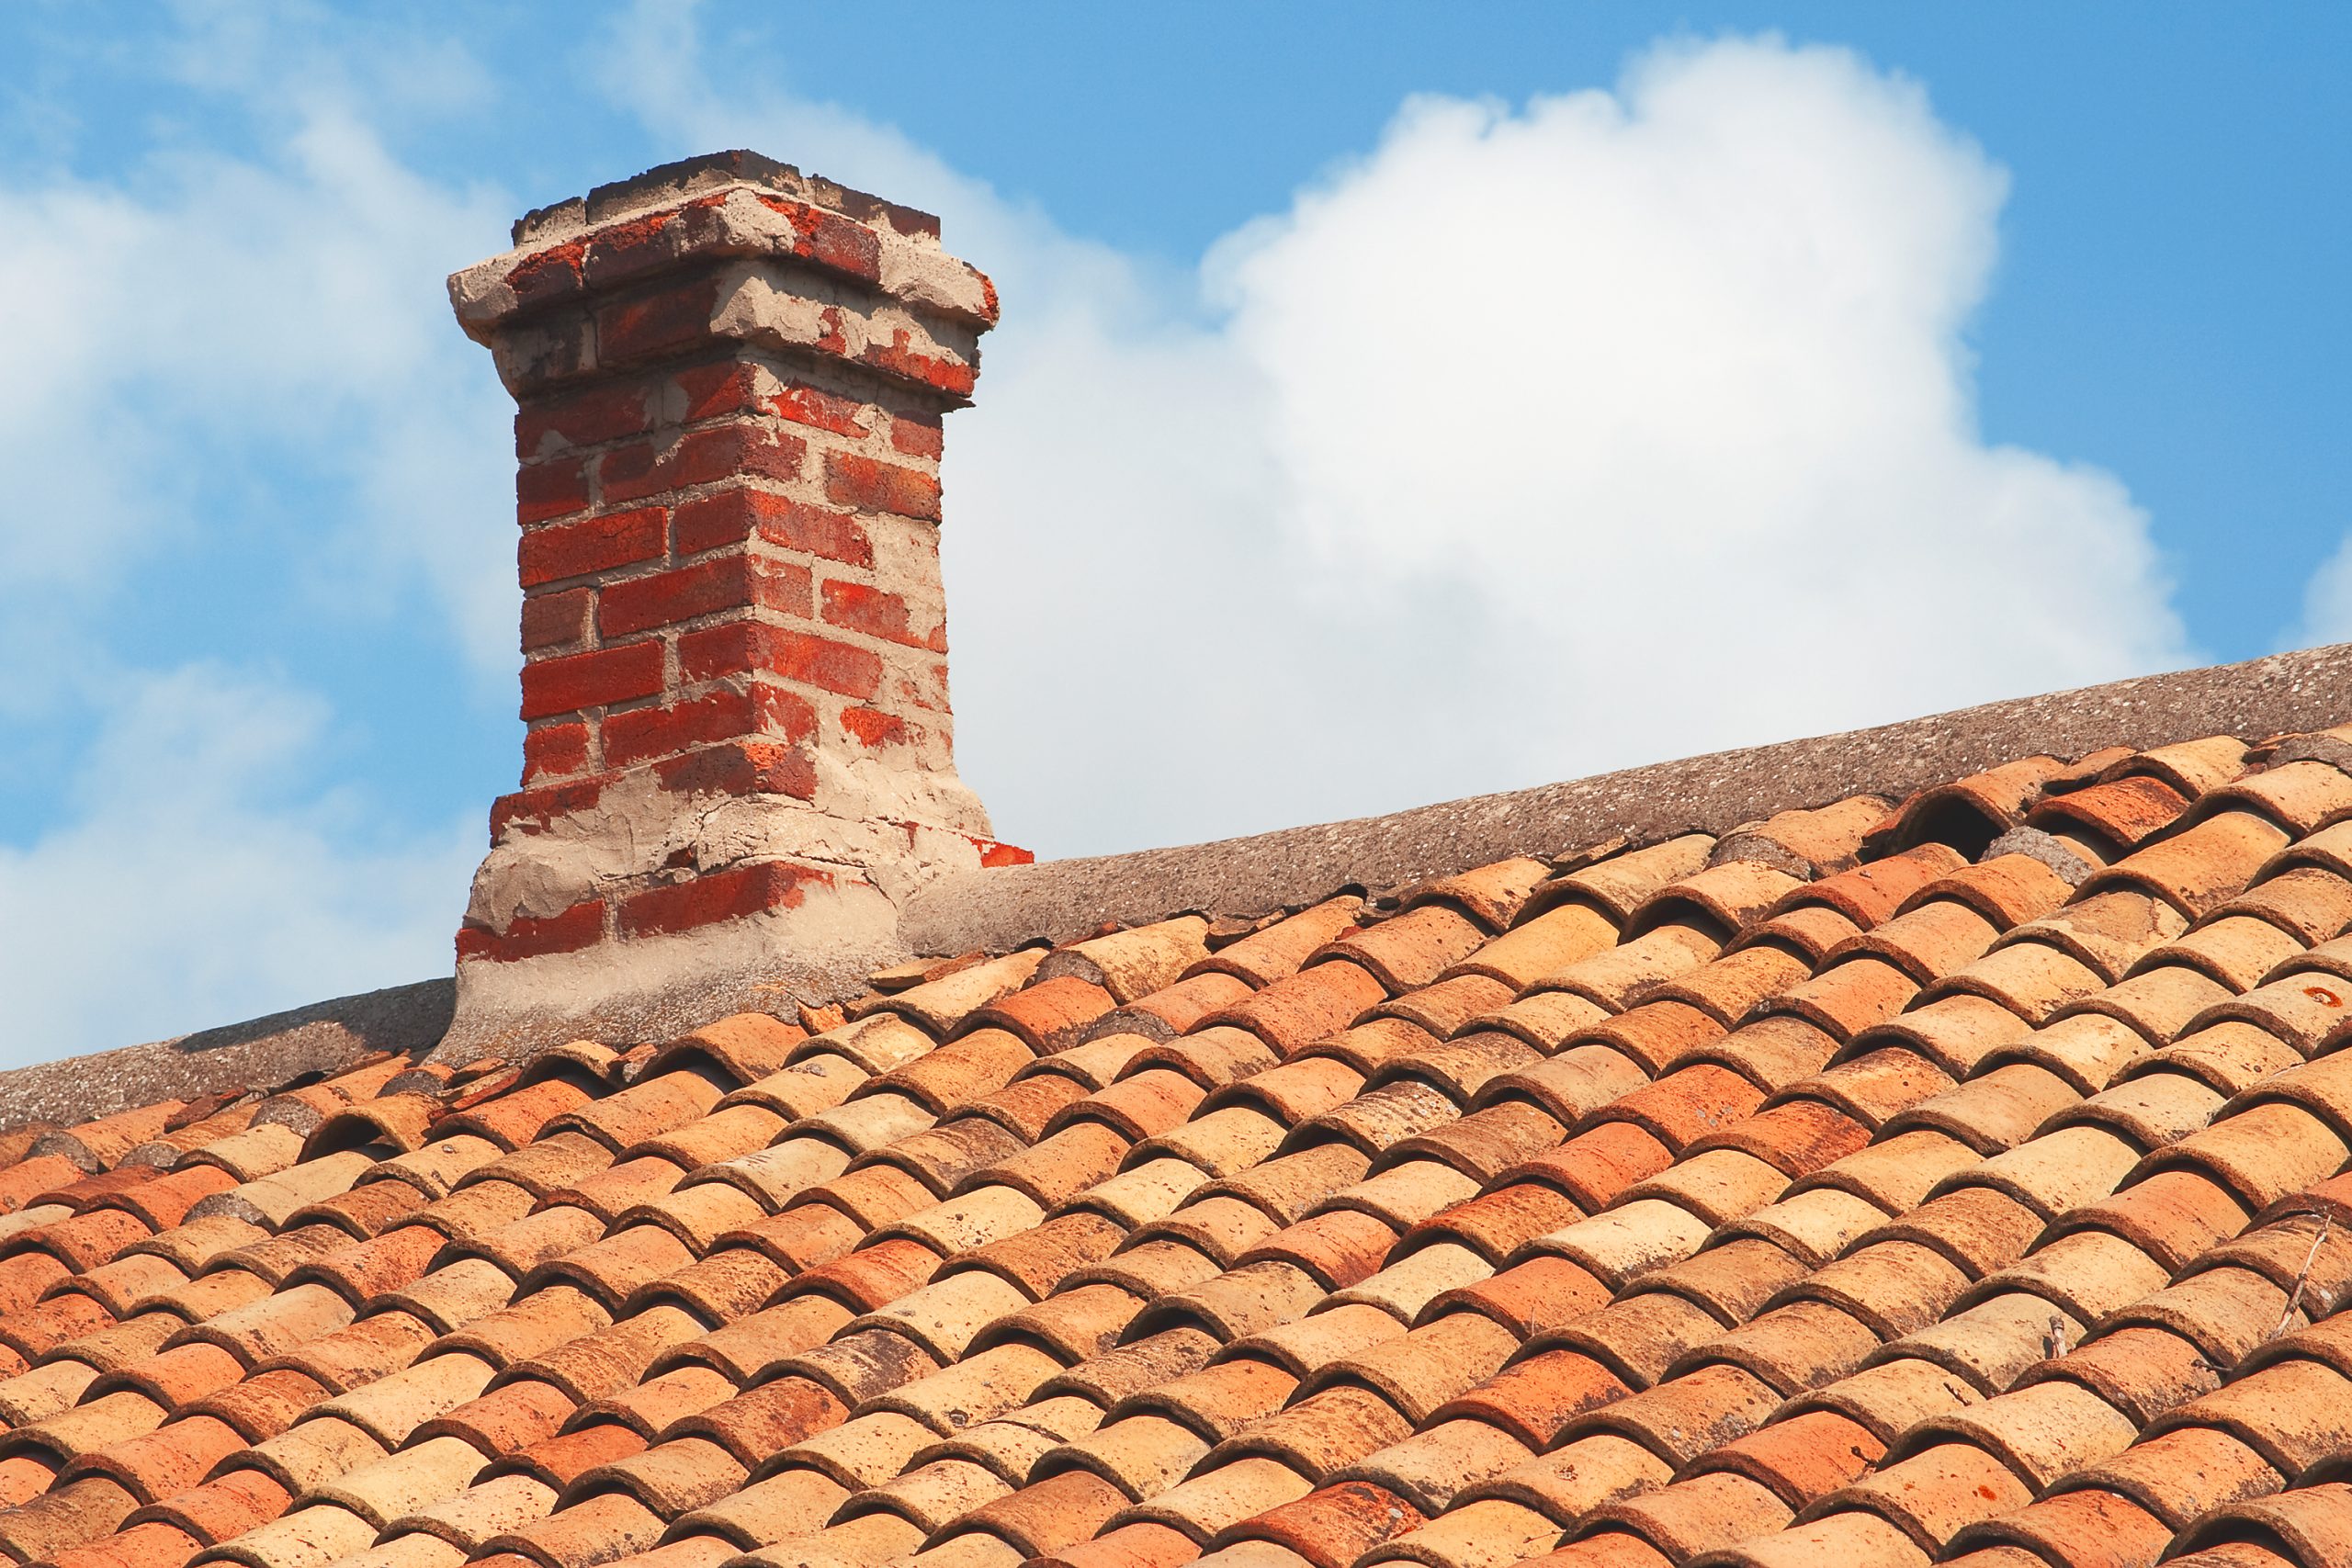 Tile roof with brick chimney against a blue sky